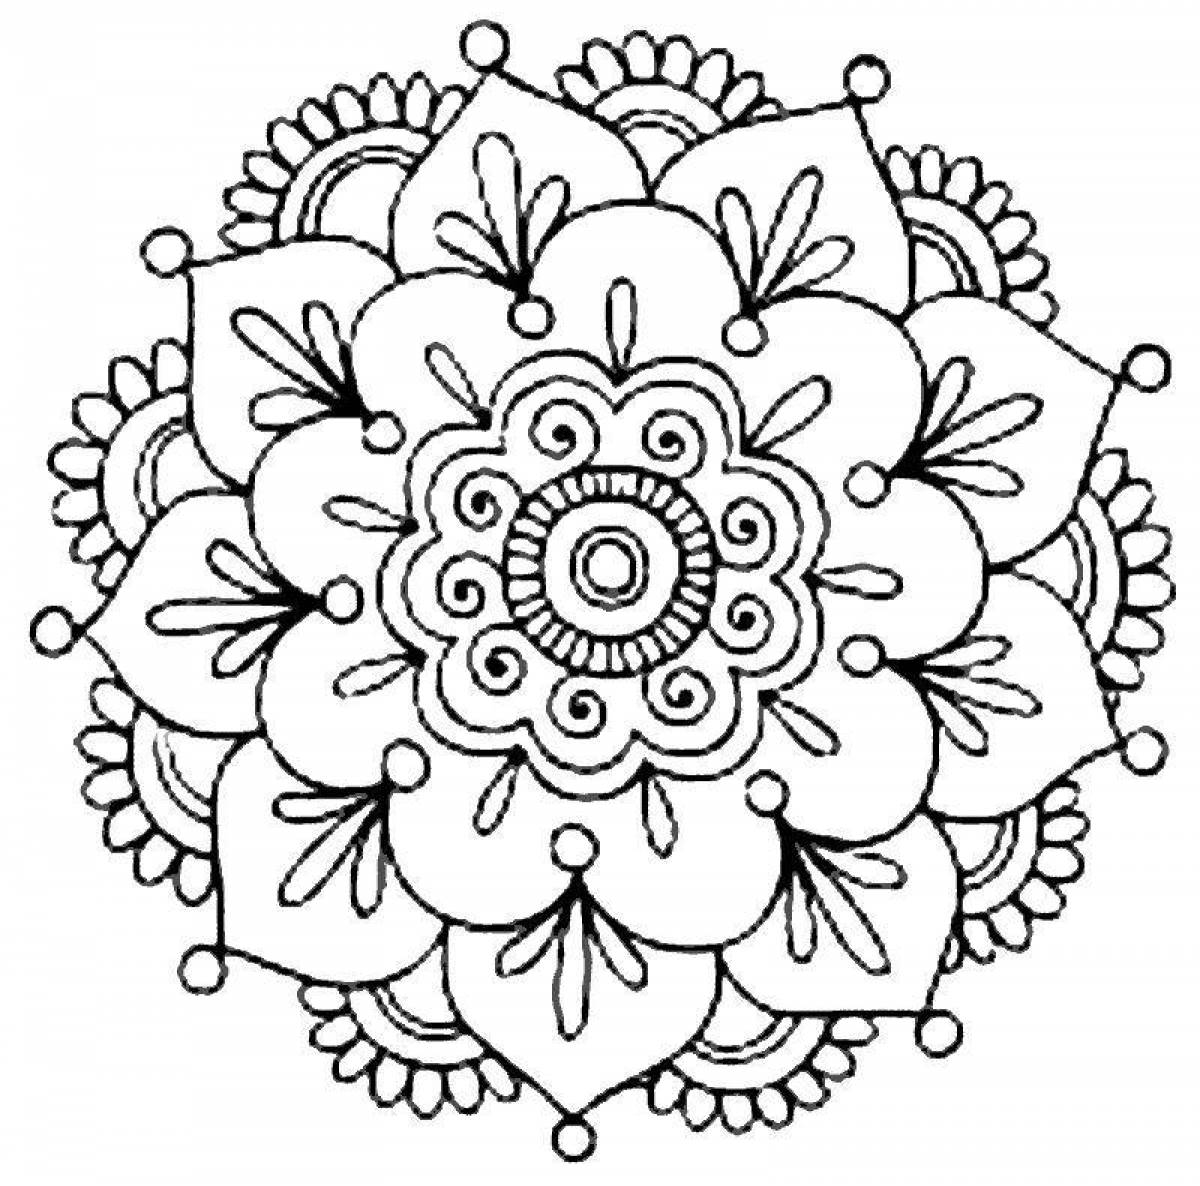 Awesome coloring page ornament